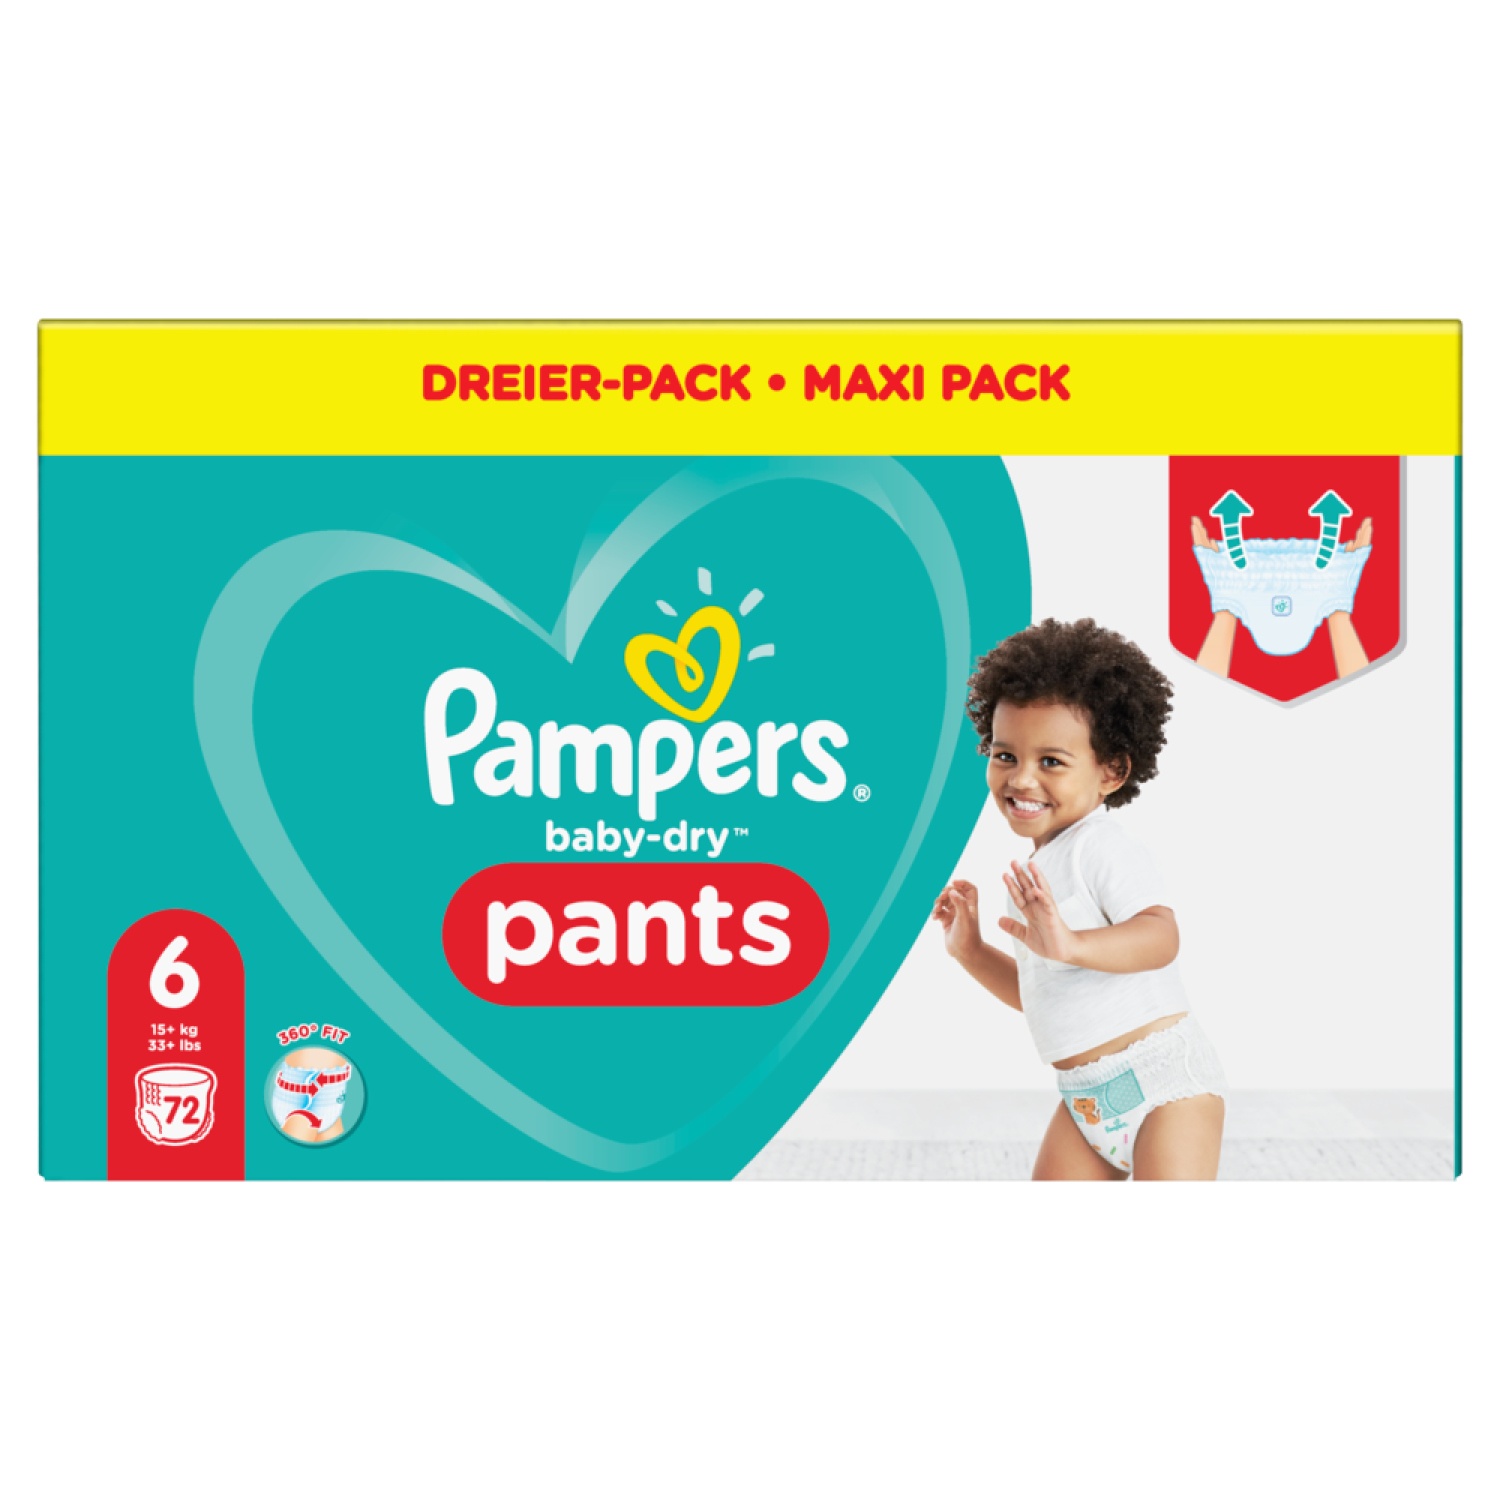 Pampers® baby-dry™